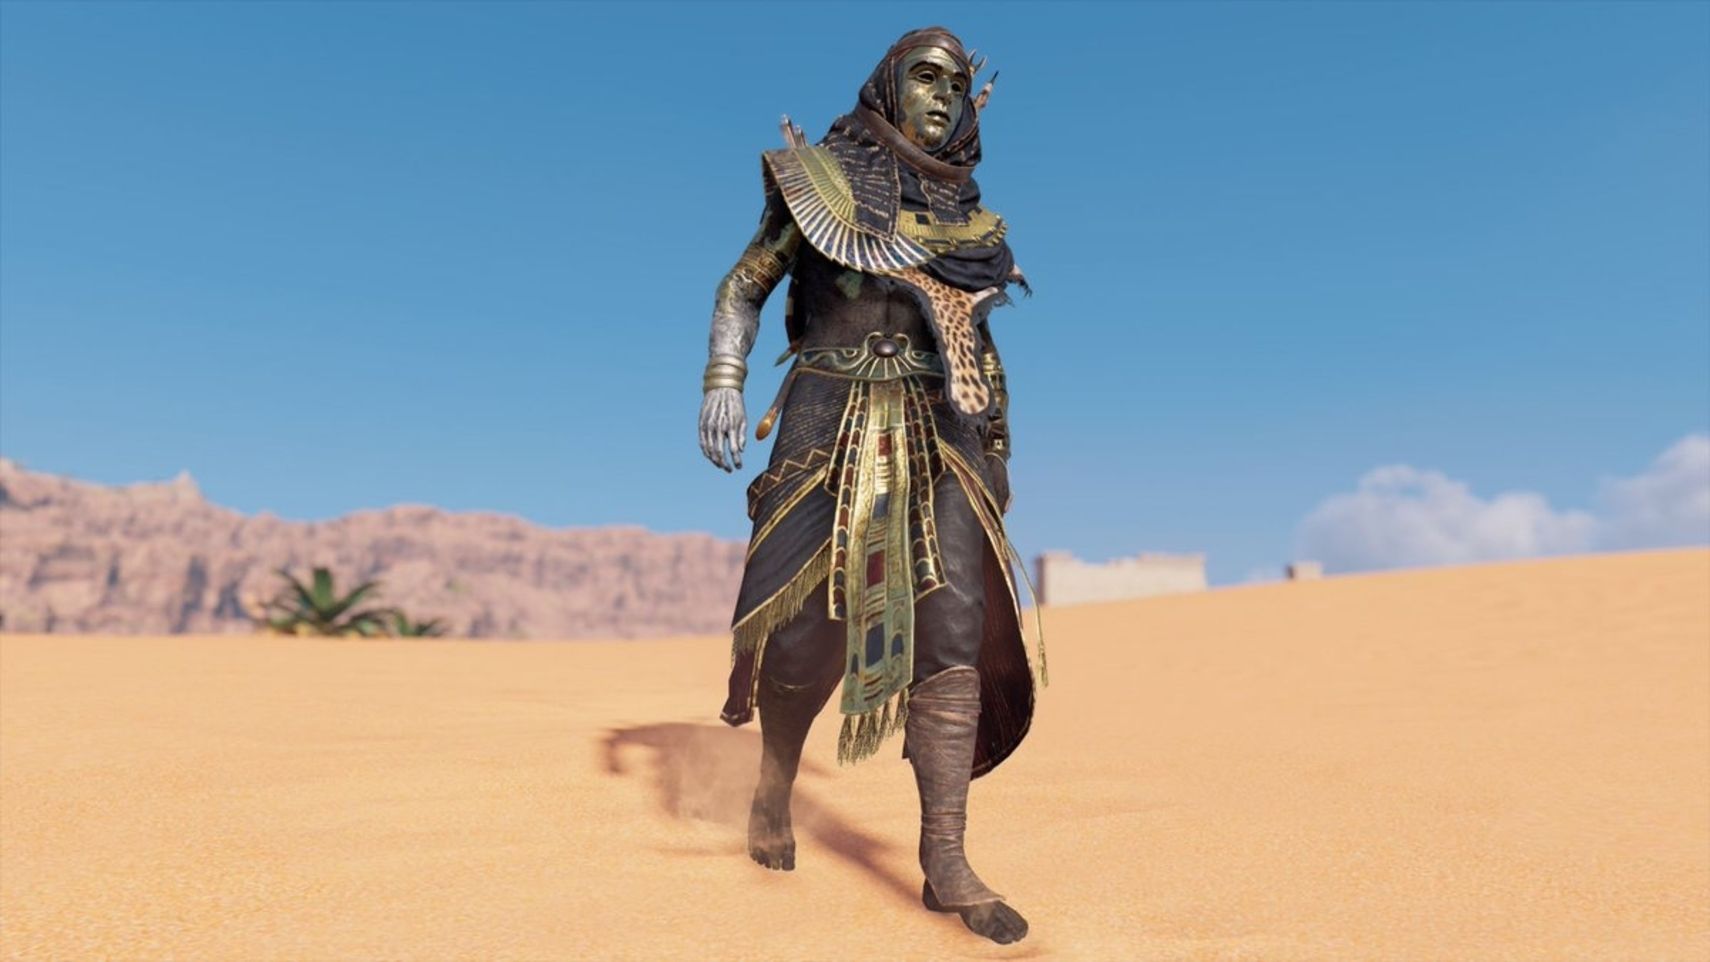 15 Best Armor Sets In Assassin’s Creed Origins Ranked